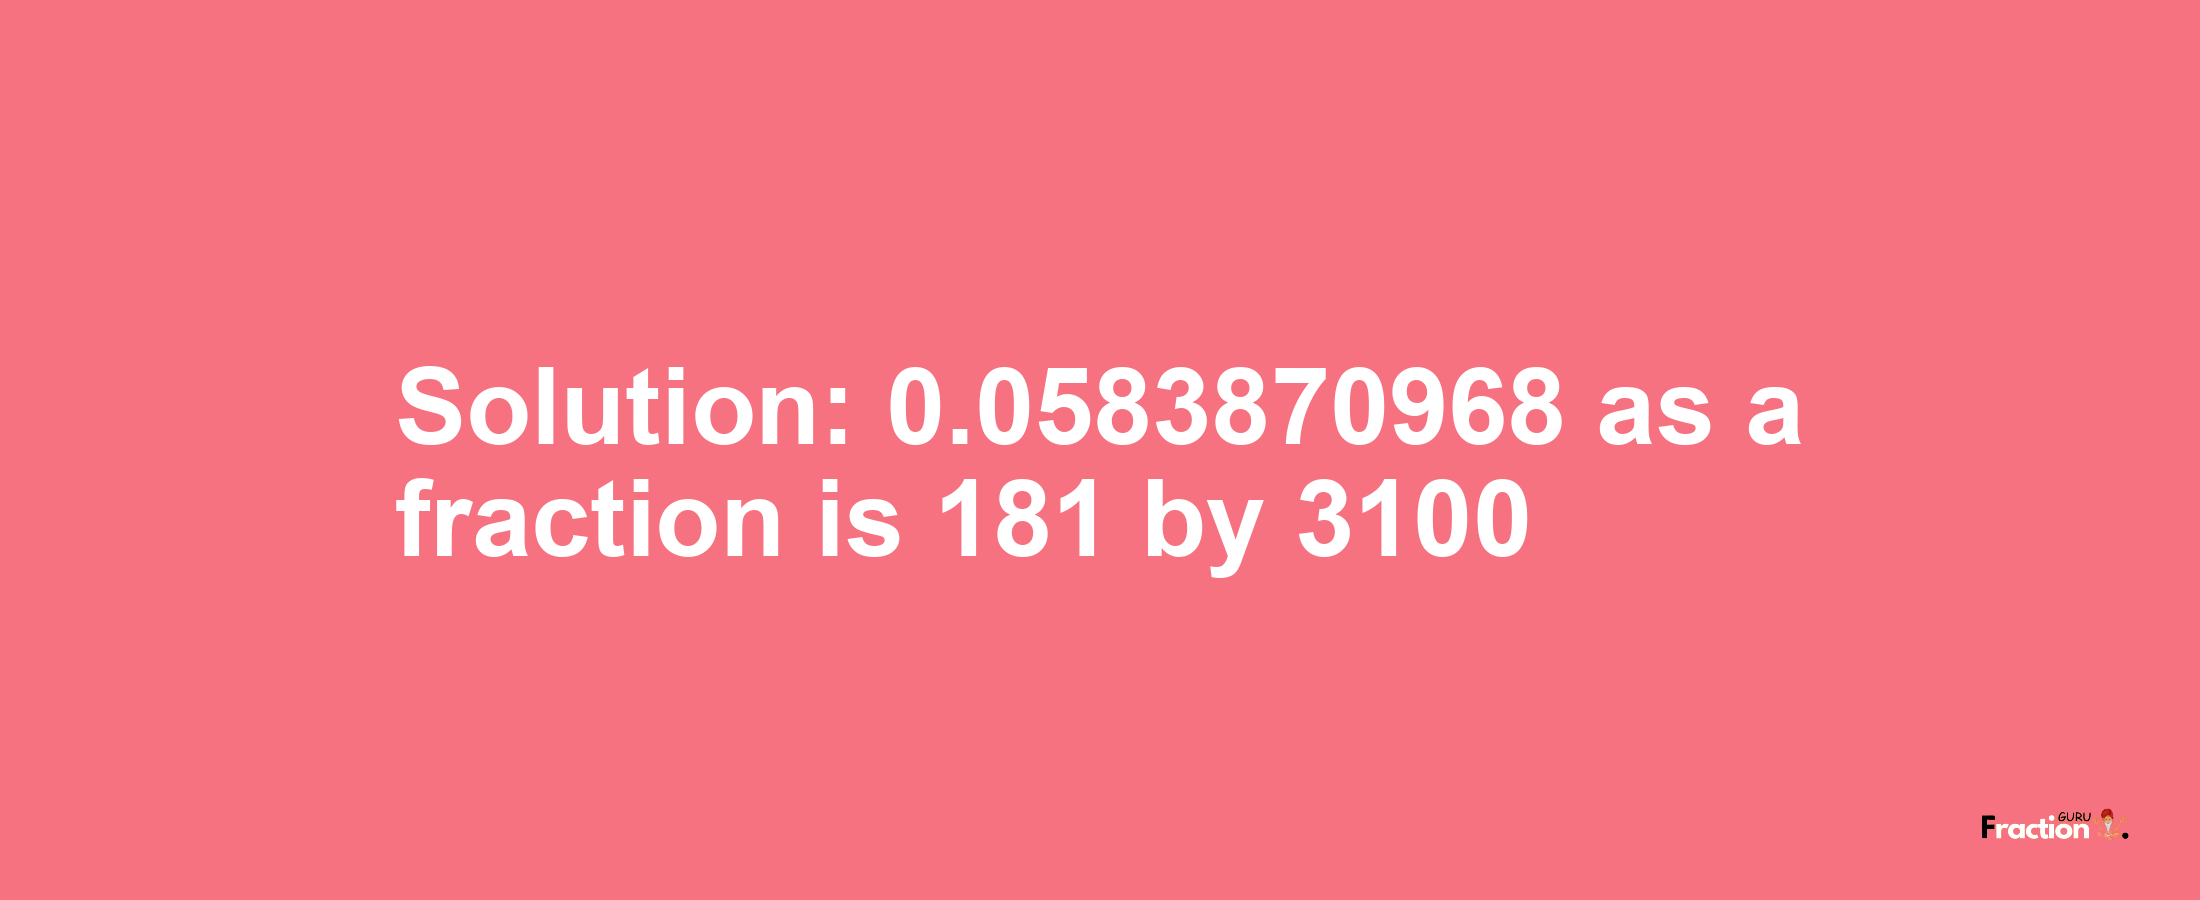 Solution:0.0583870968 as a fraction is 181/3100